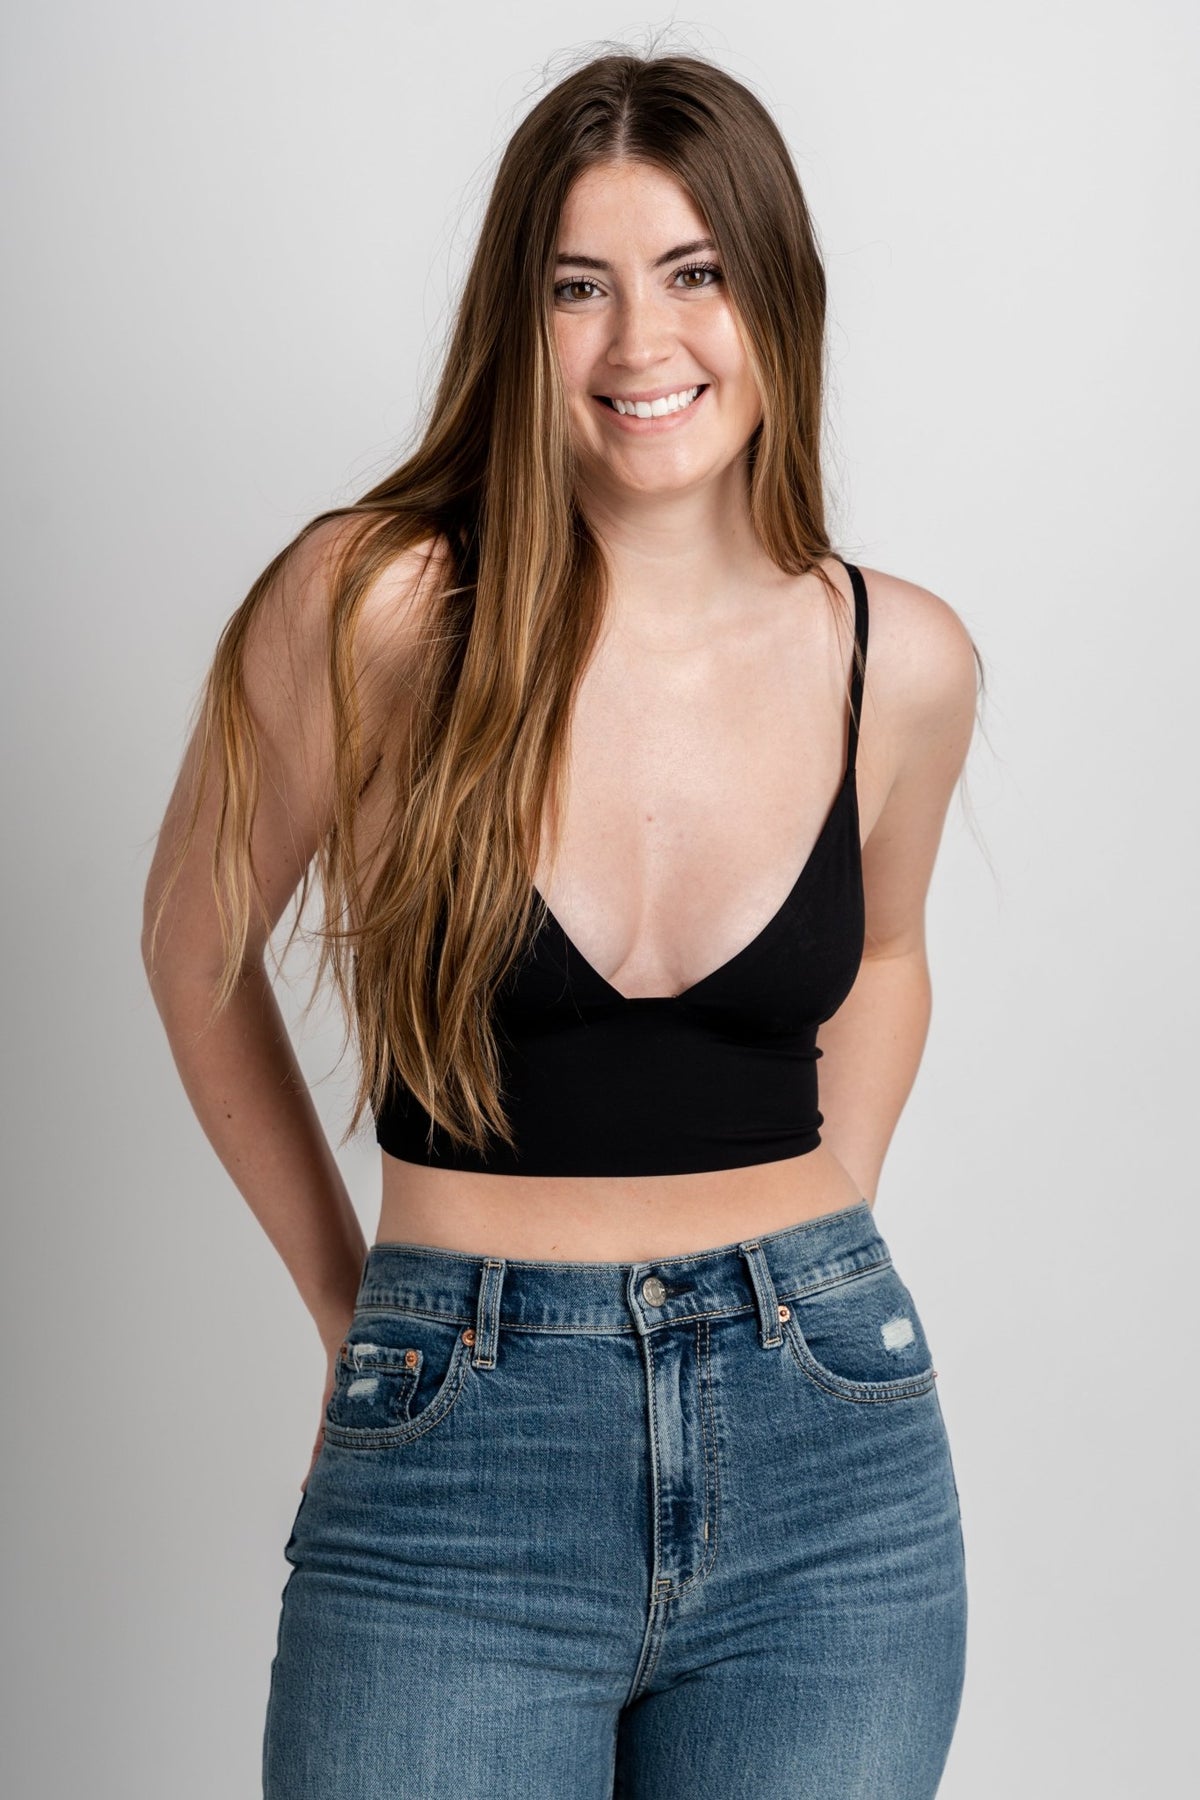 Triangle bralette black - Cute Bralette - Trendy Bras and Bralettes at Lush Fashion Lounge Boutique in Oklahoma City